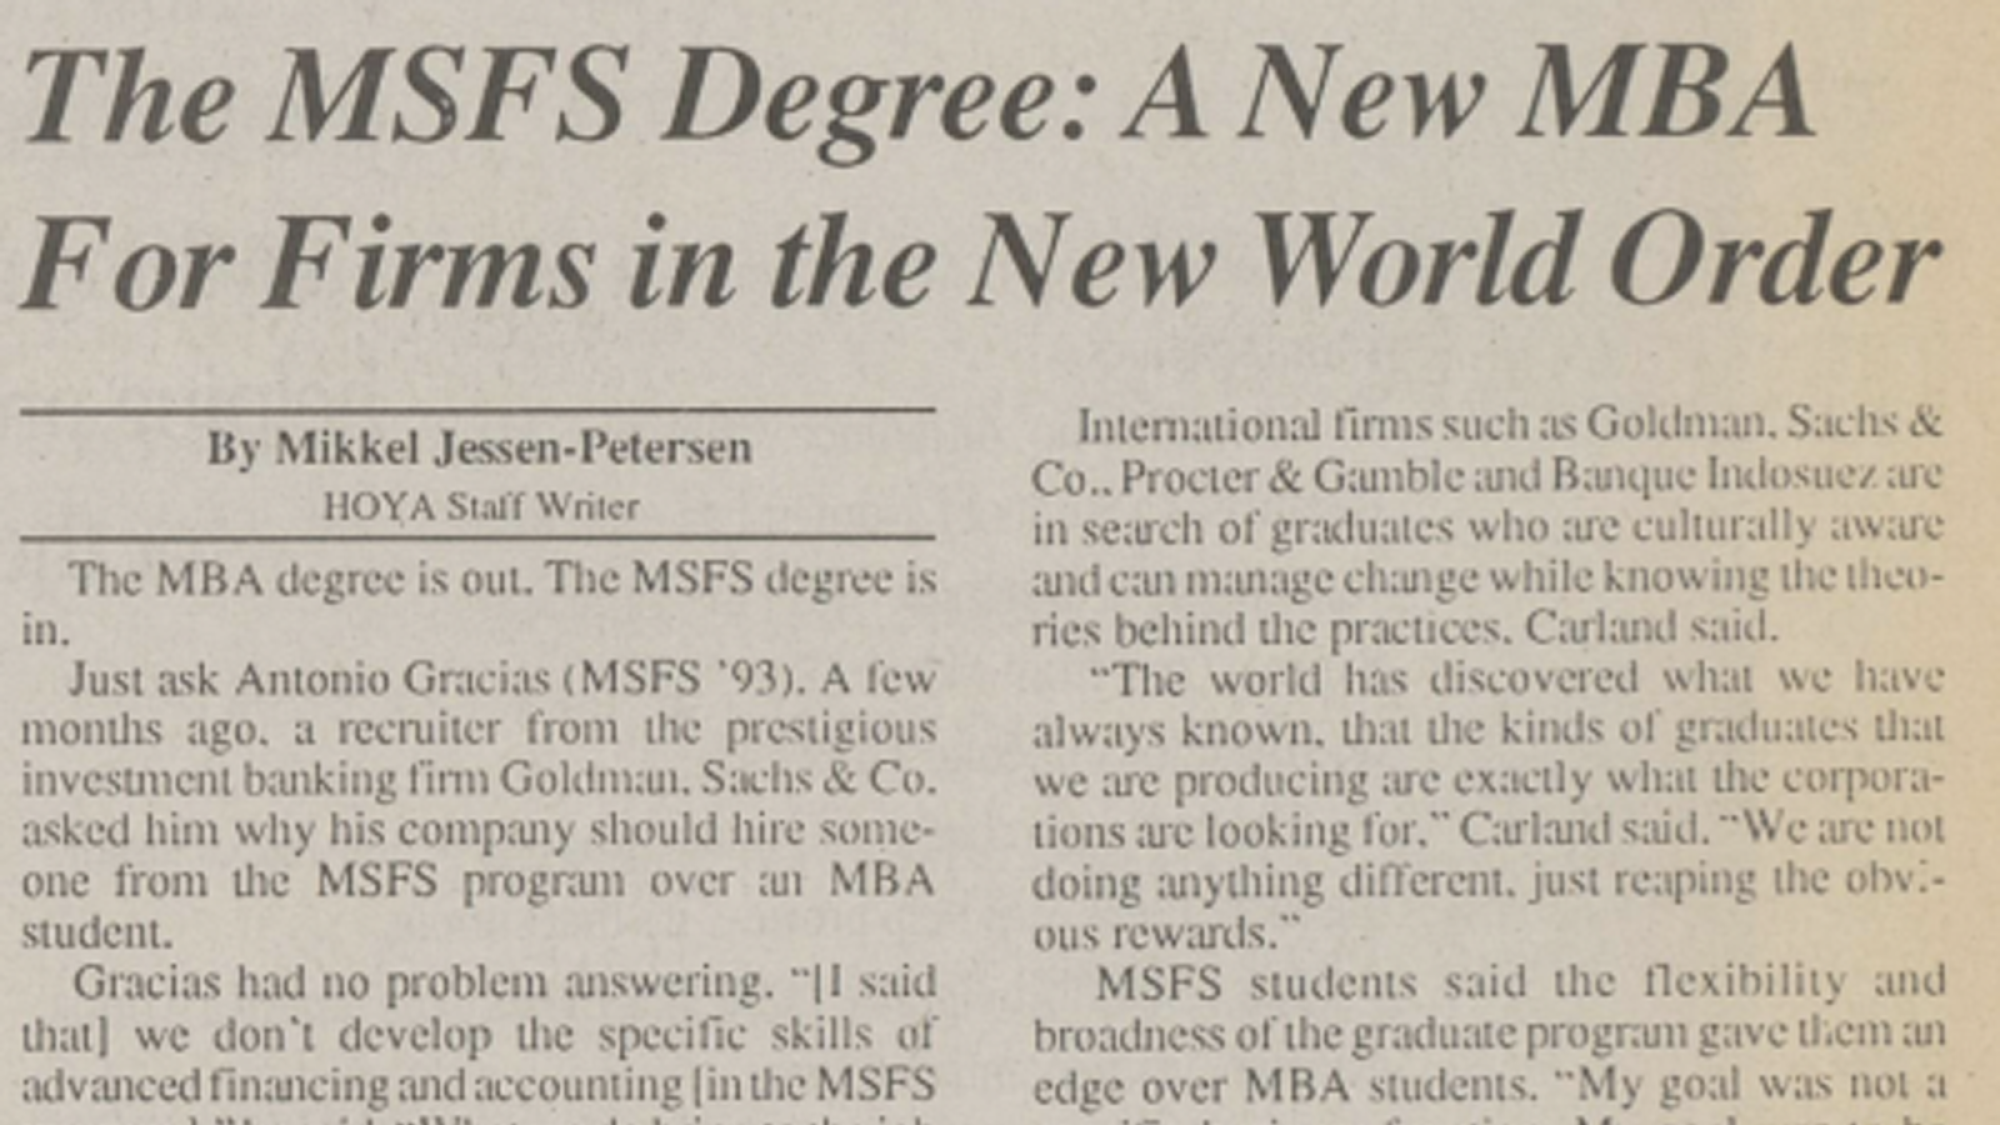 Hoya article on MSFS as New MBA